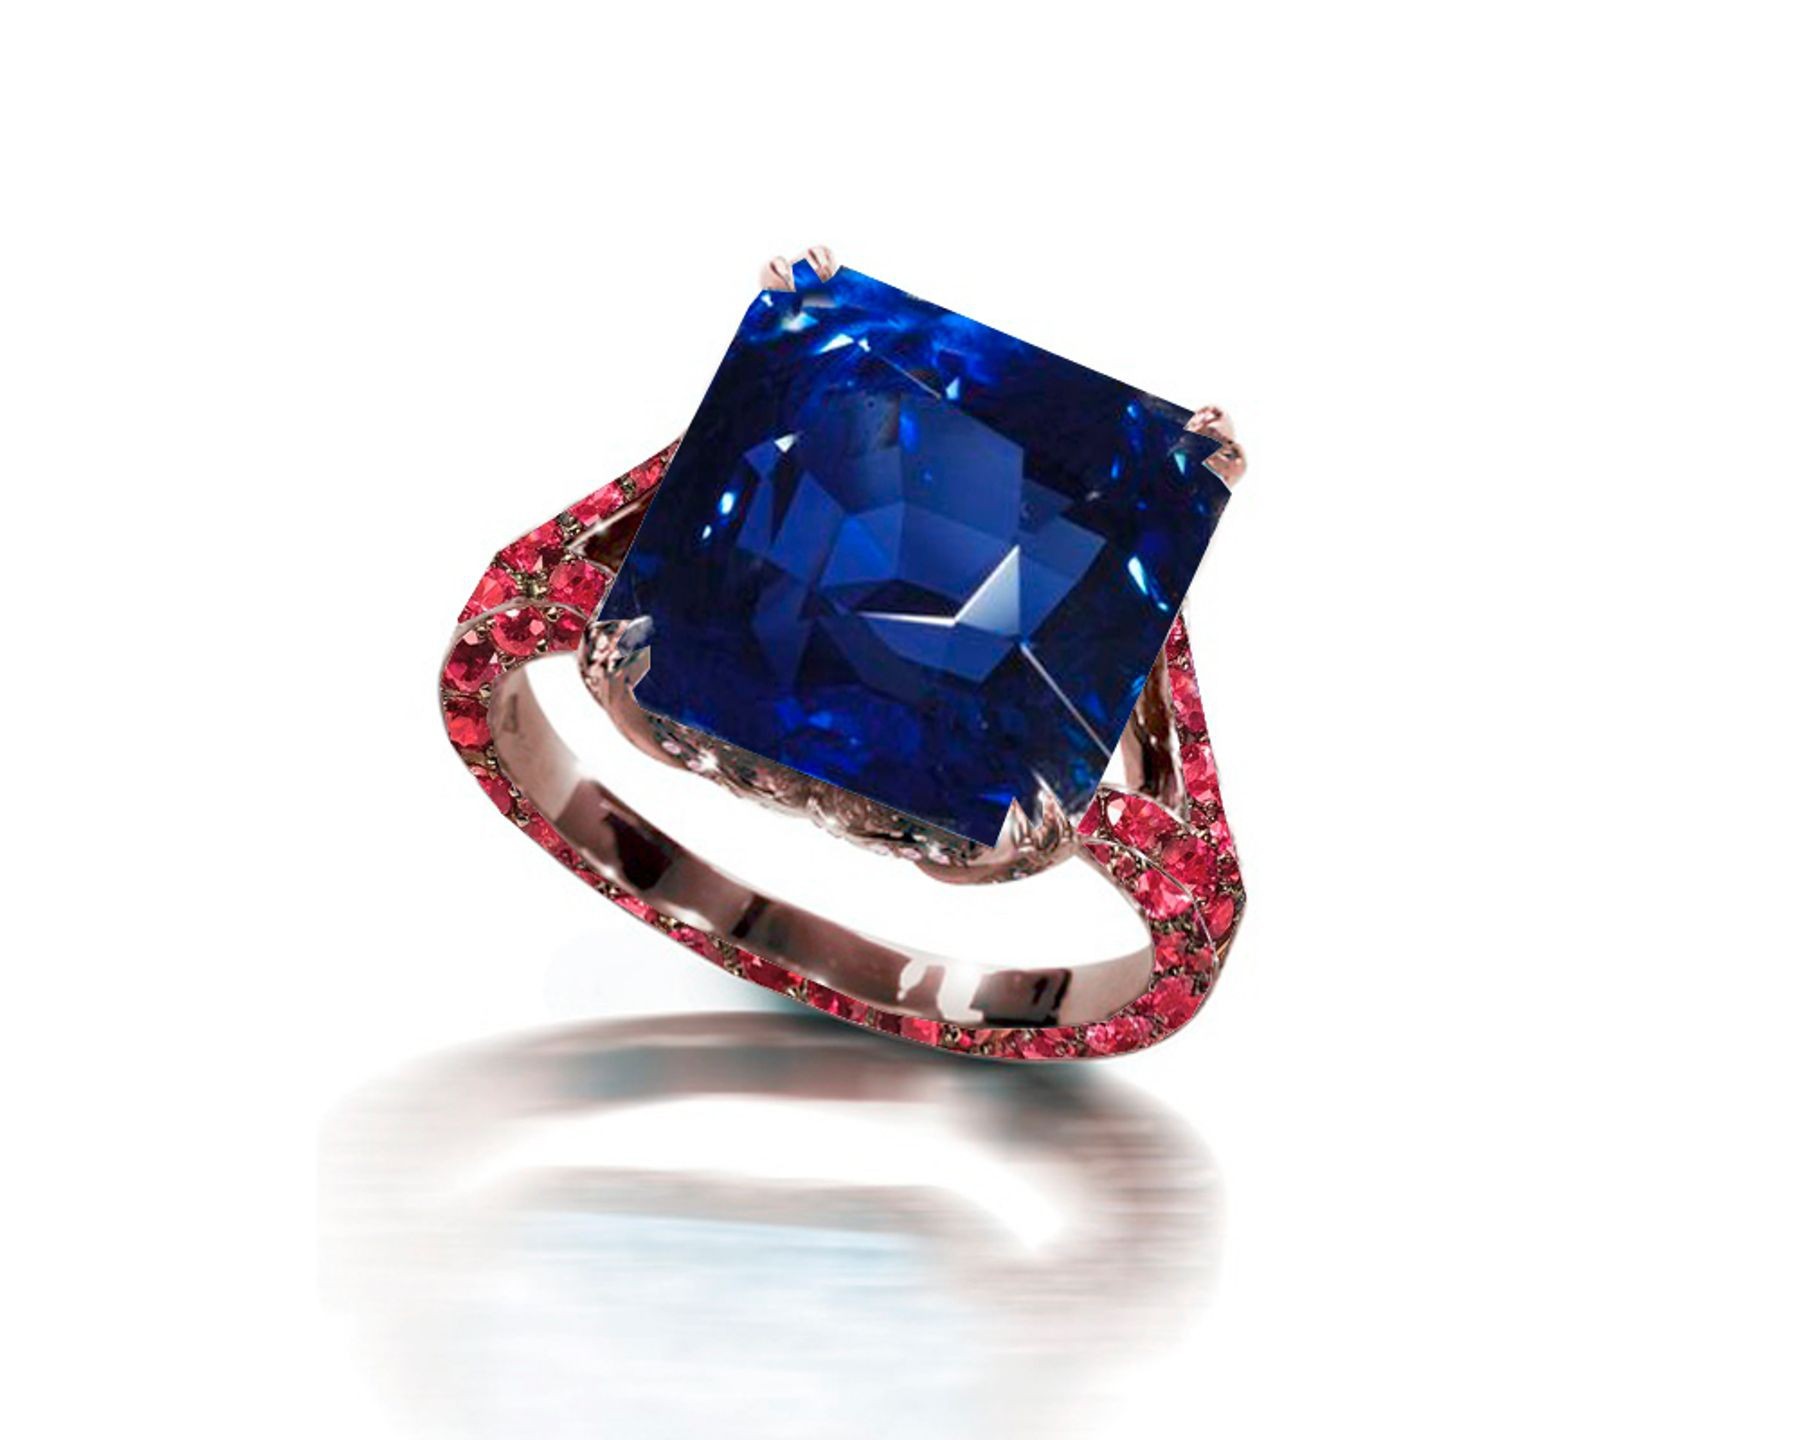 Ring with Square Blue Sapphire & Pave Set Rubies in Gold or Platinum